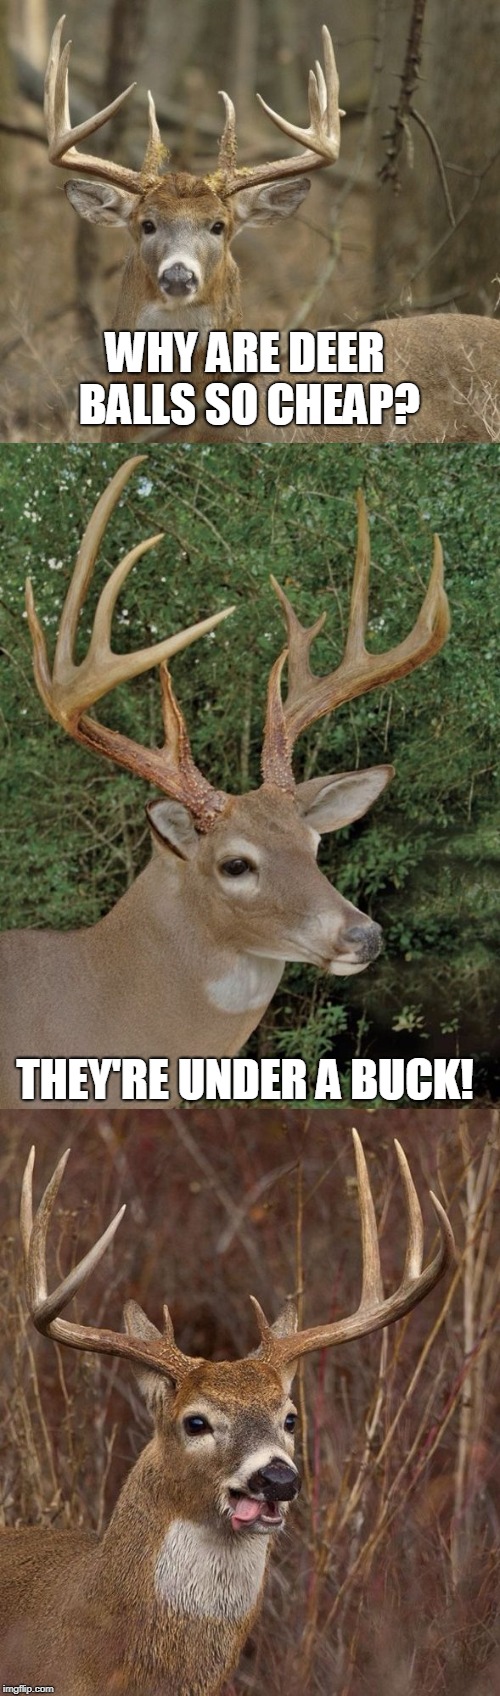 Bad Pun Buck | WHY ARE DEER BALLS SO CHEAP? THEY'RE UNDER A BUCK! | image tagged in bad pun buck,memes,balls,deer,dollar store,cheap | made w/ Imgflip meme maker